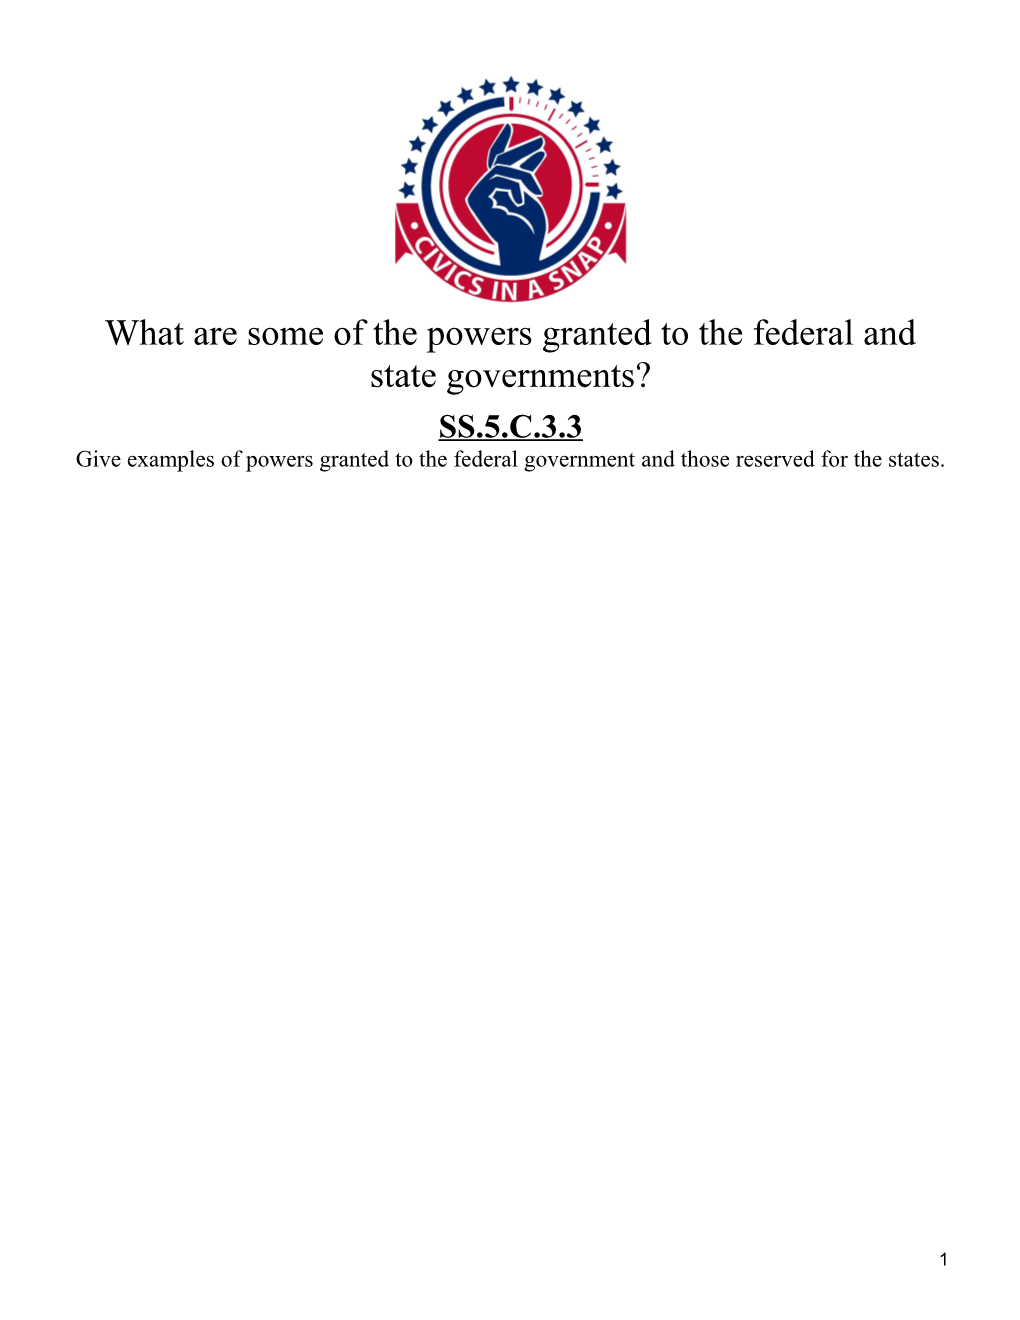 What Are Some of the Powers Granted to the Federal and State Governments?